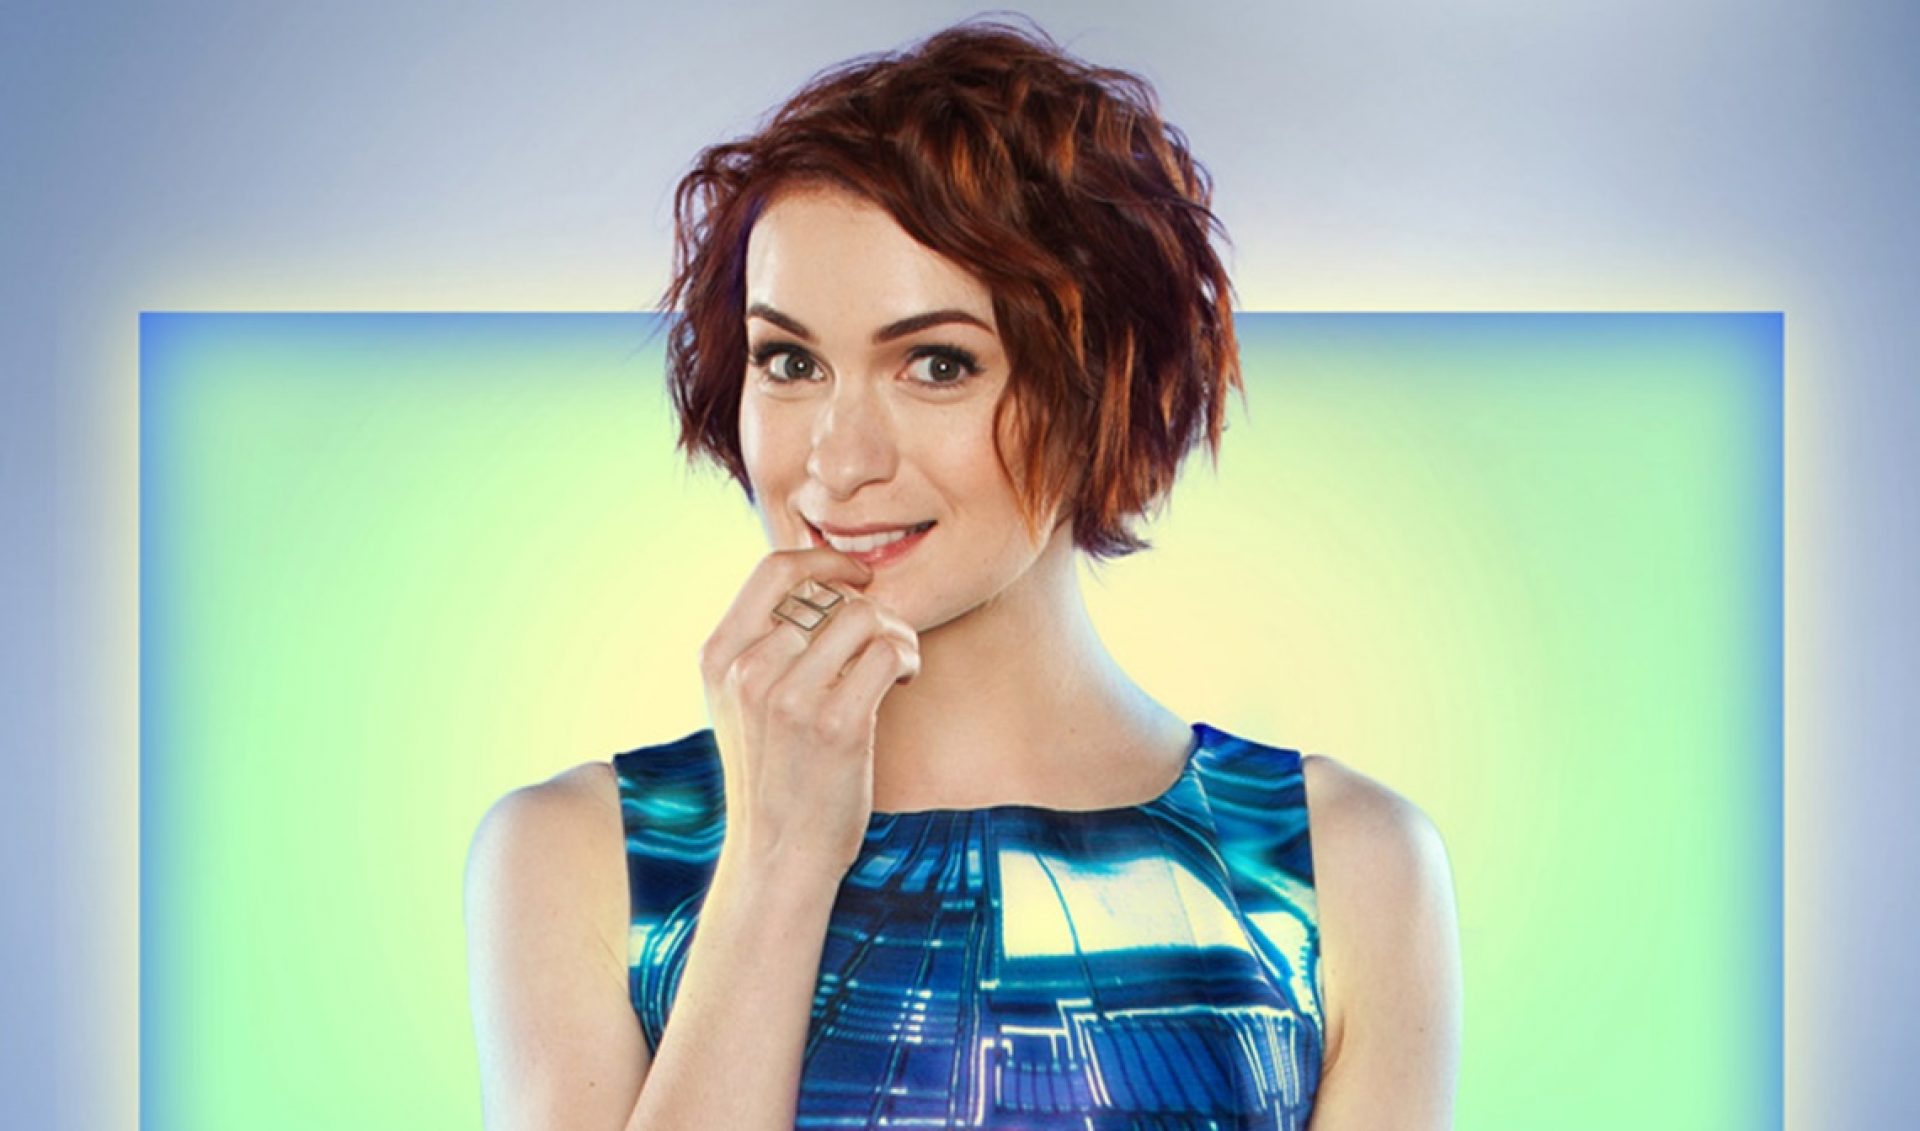 Felicia Day’s Book Hits Amazon Bestseller List Shortly After Its Debut